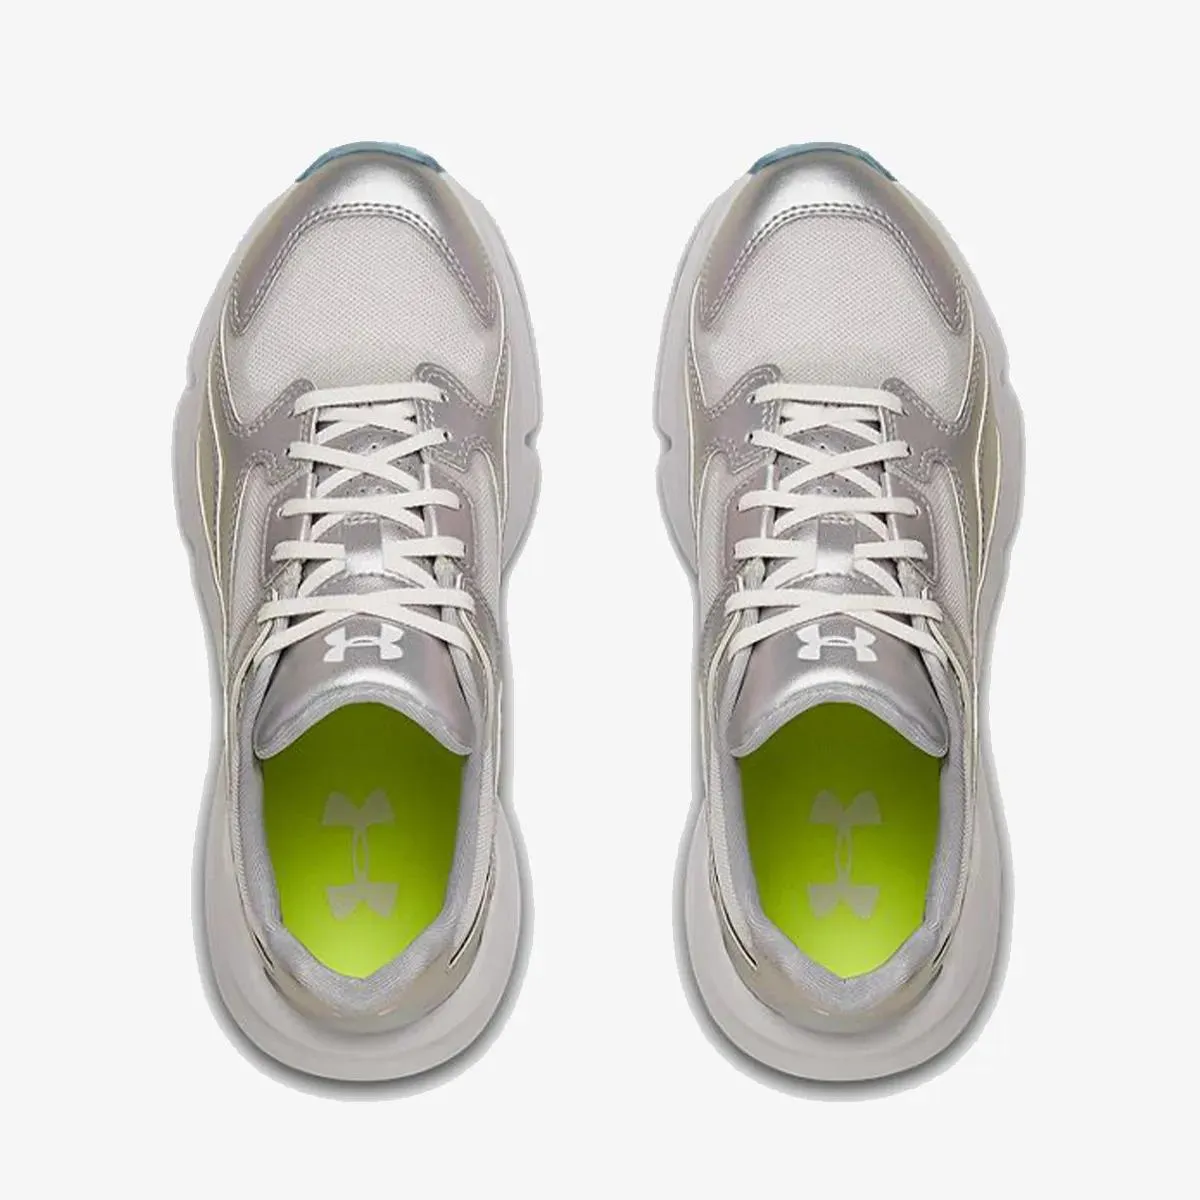 Under Armour UA Forge 96 HL Iridescent Sportstyle Shoes 